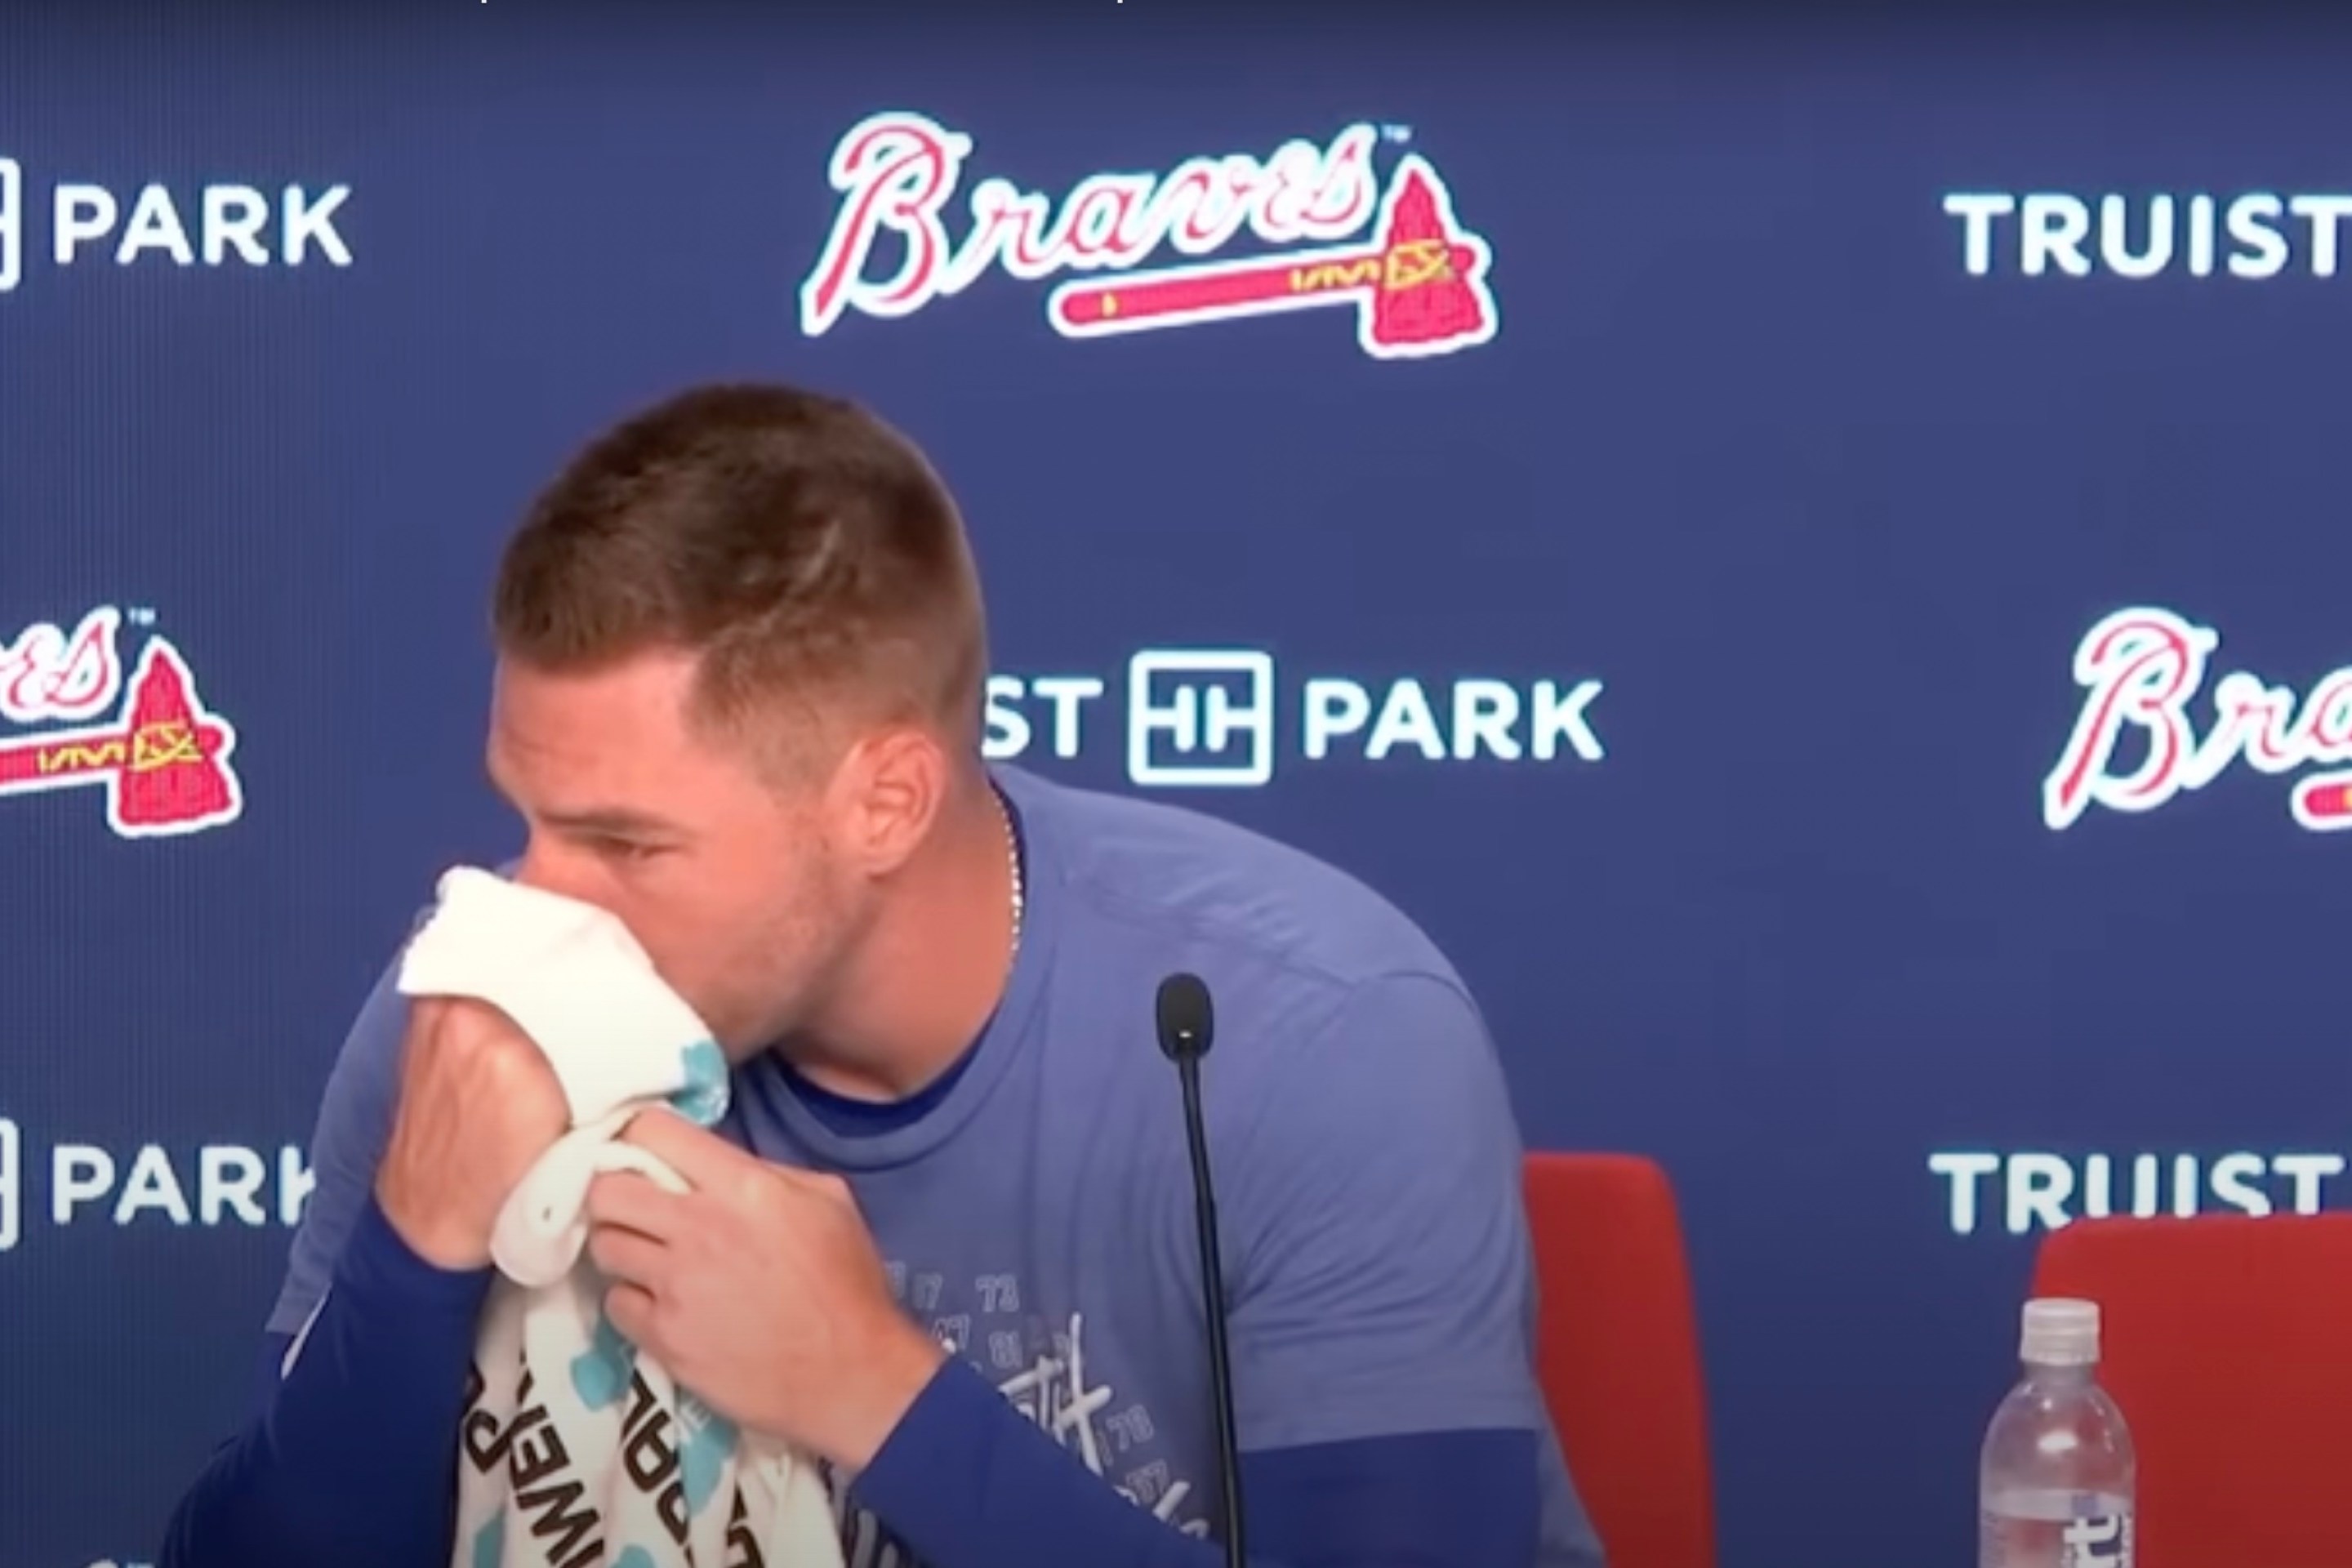 An emotional Freddie Freeman wipes his nose with a towel during a presser.